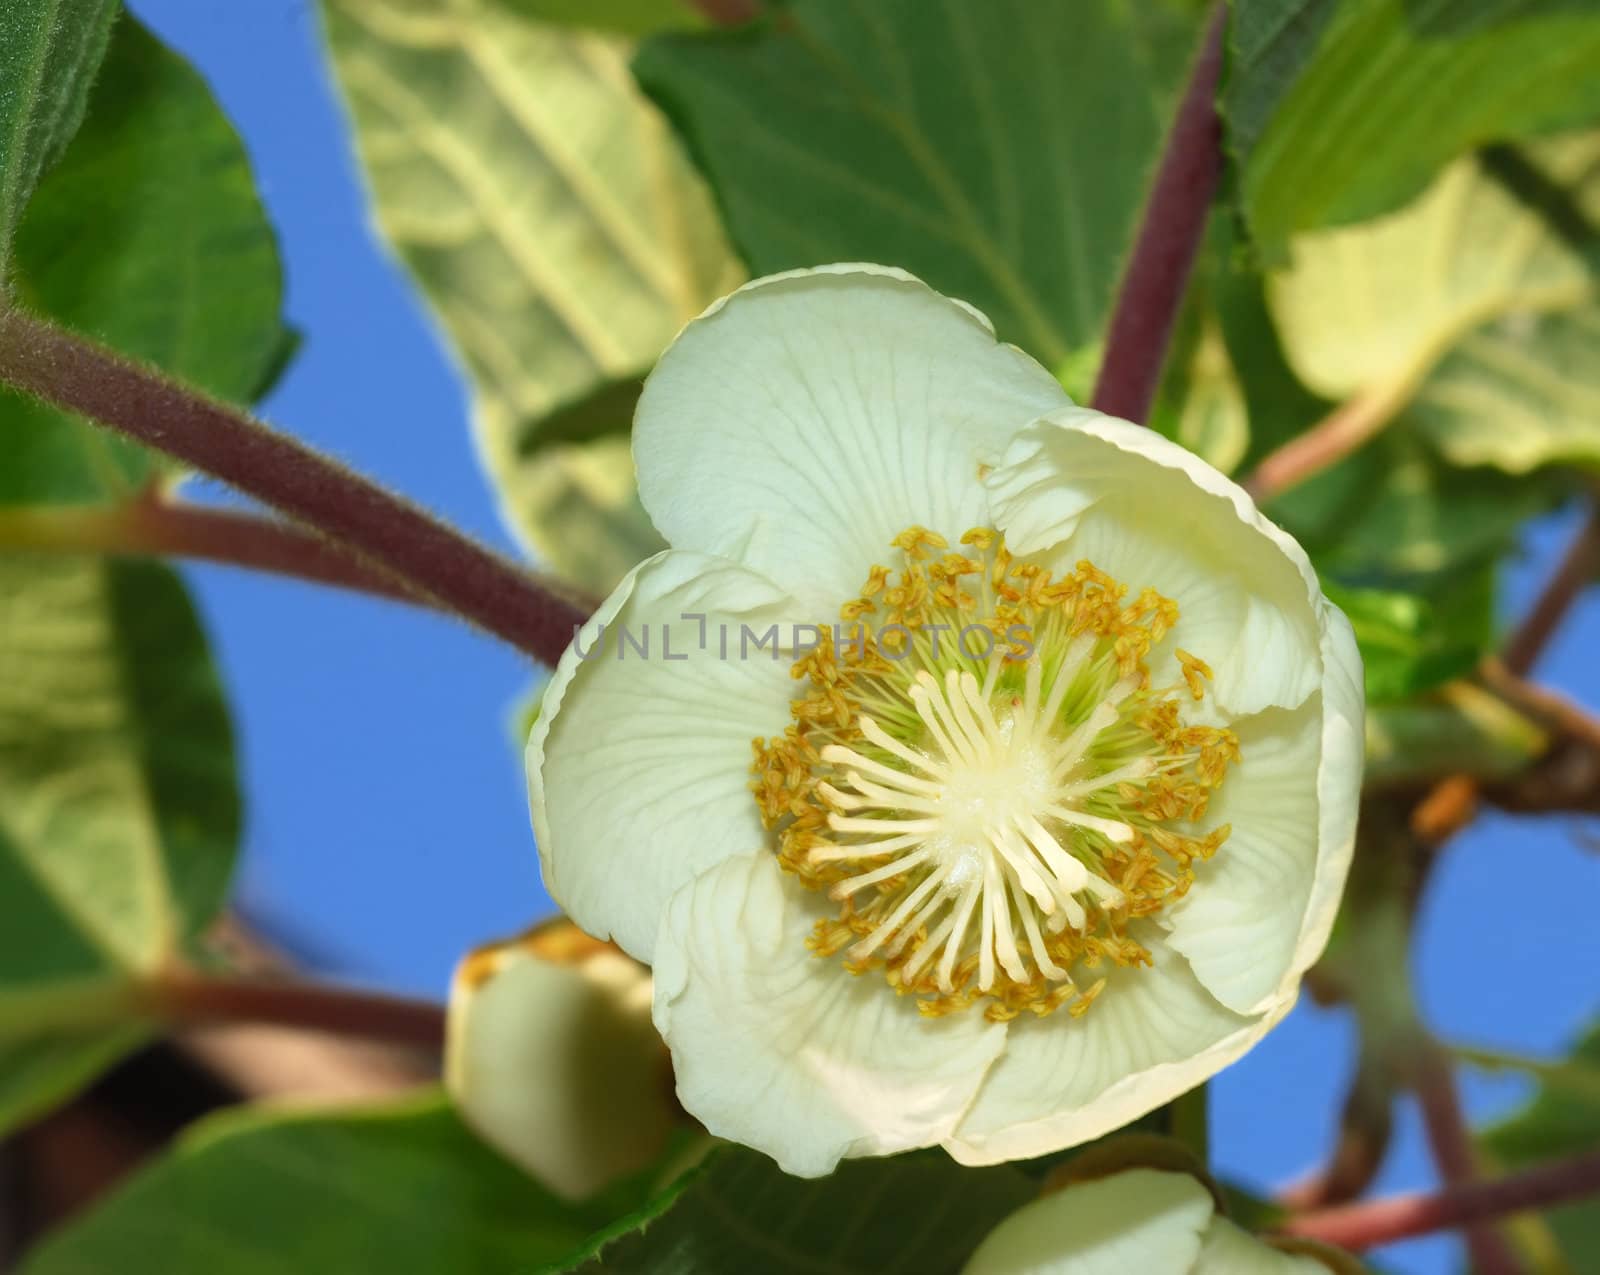 Close-up of a kiwifruit female flower with leaves in background.